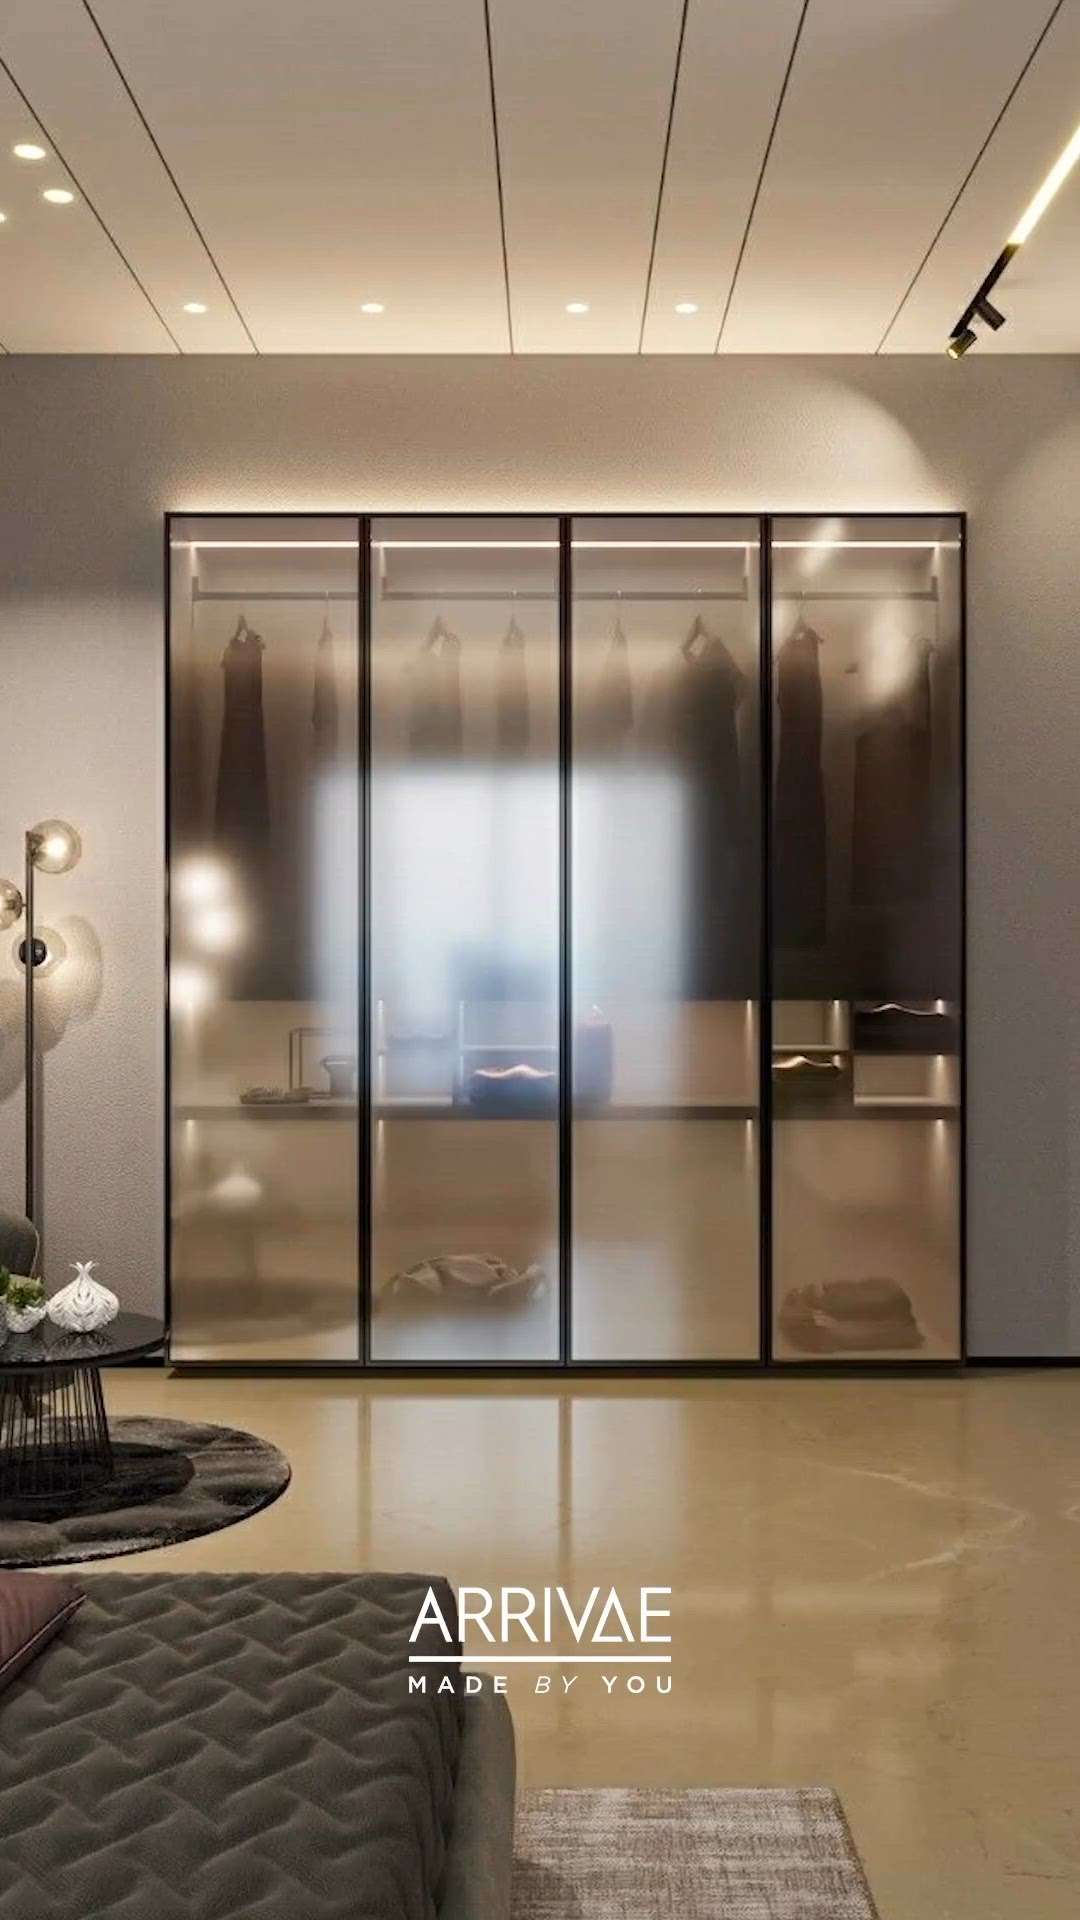 #Arrivae’s ultra-modern and fully customisable wardrobes are every fashionista’s dream. Find all the essentials from a variety of storage to sleek lighting and elegant design for a boutique feel in your own home.

#wardrobe #wardrobedesign #wardrobegoals #wardrobes #wardrobestyling #wardrobeorganisation #interiordesign #interiordecor #interiorstyling #closetgoals #closetorganization #closetdesign #closetideas #hojayega